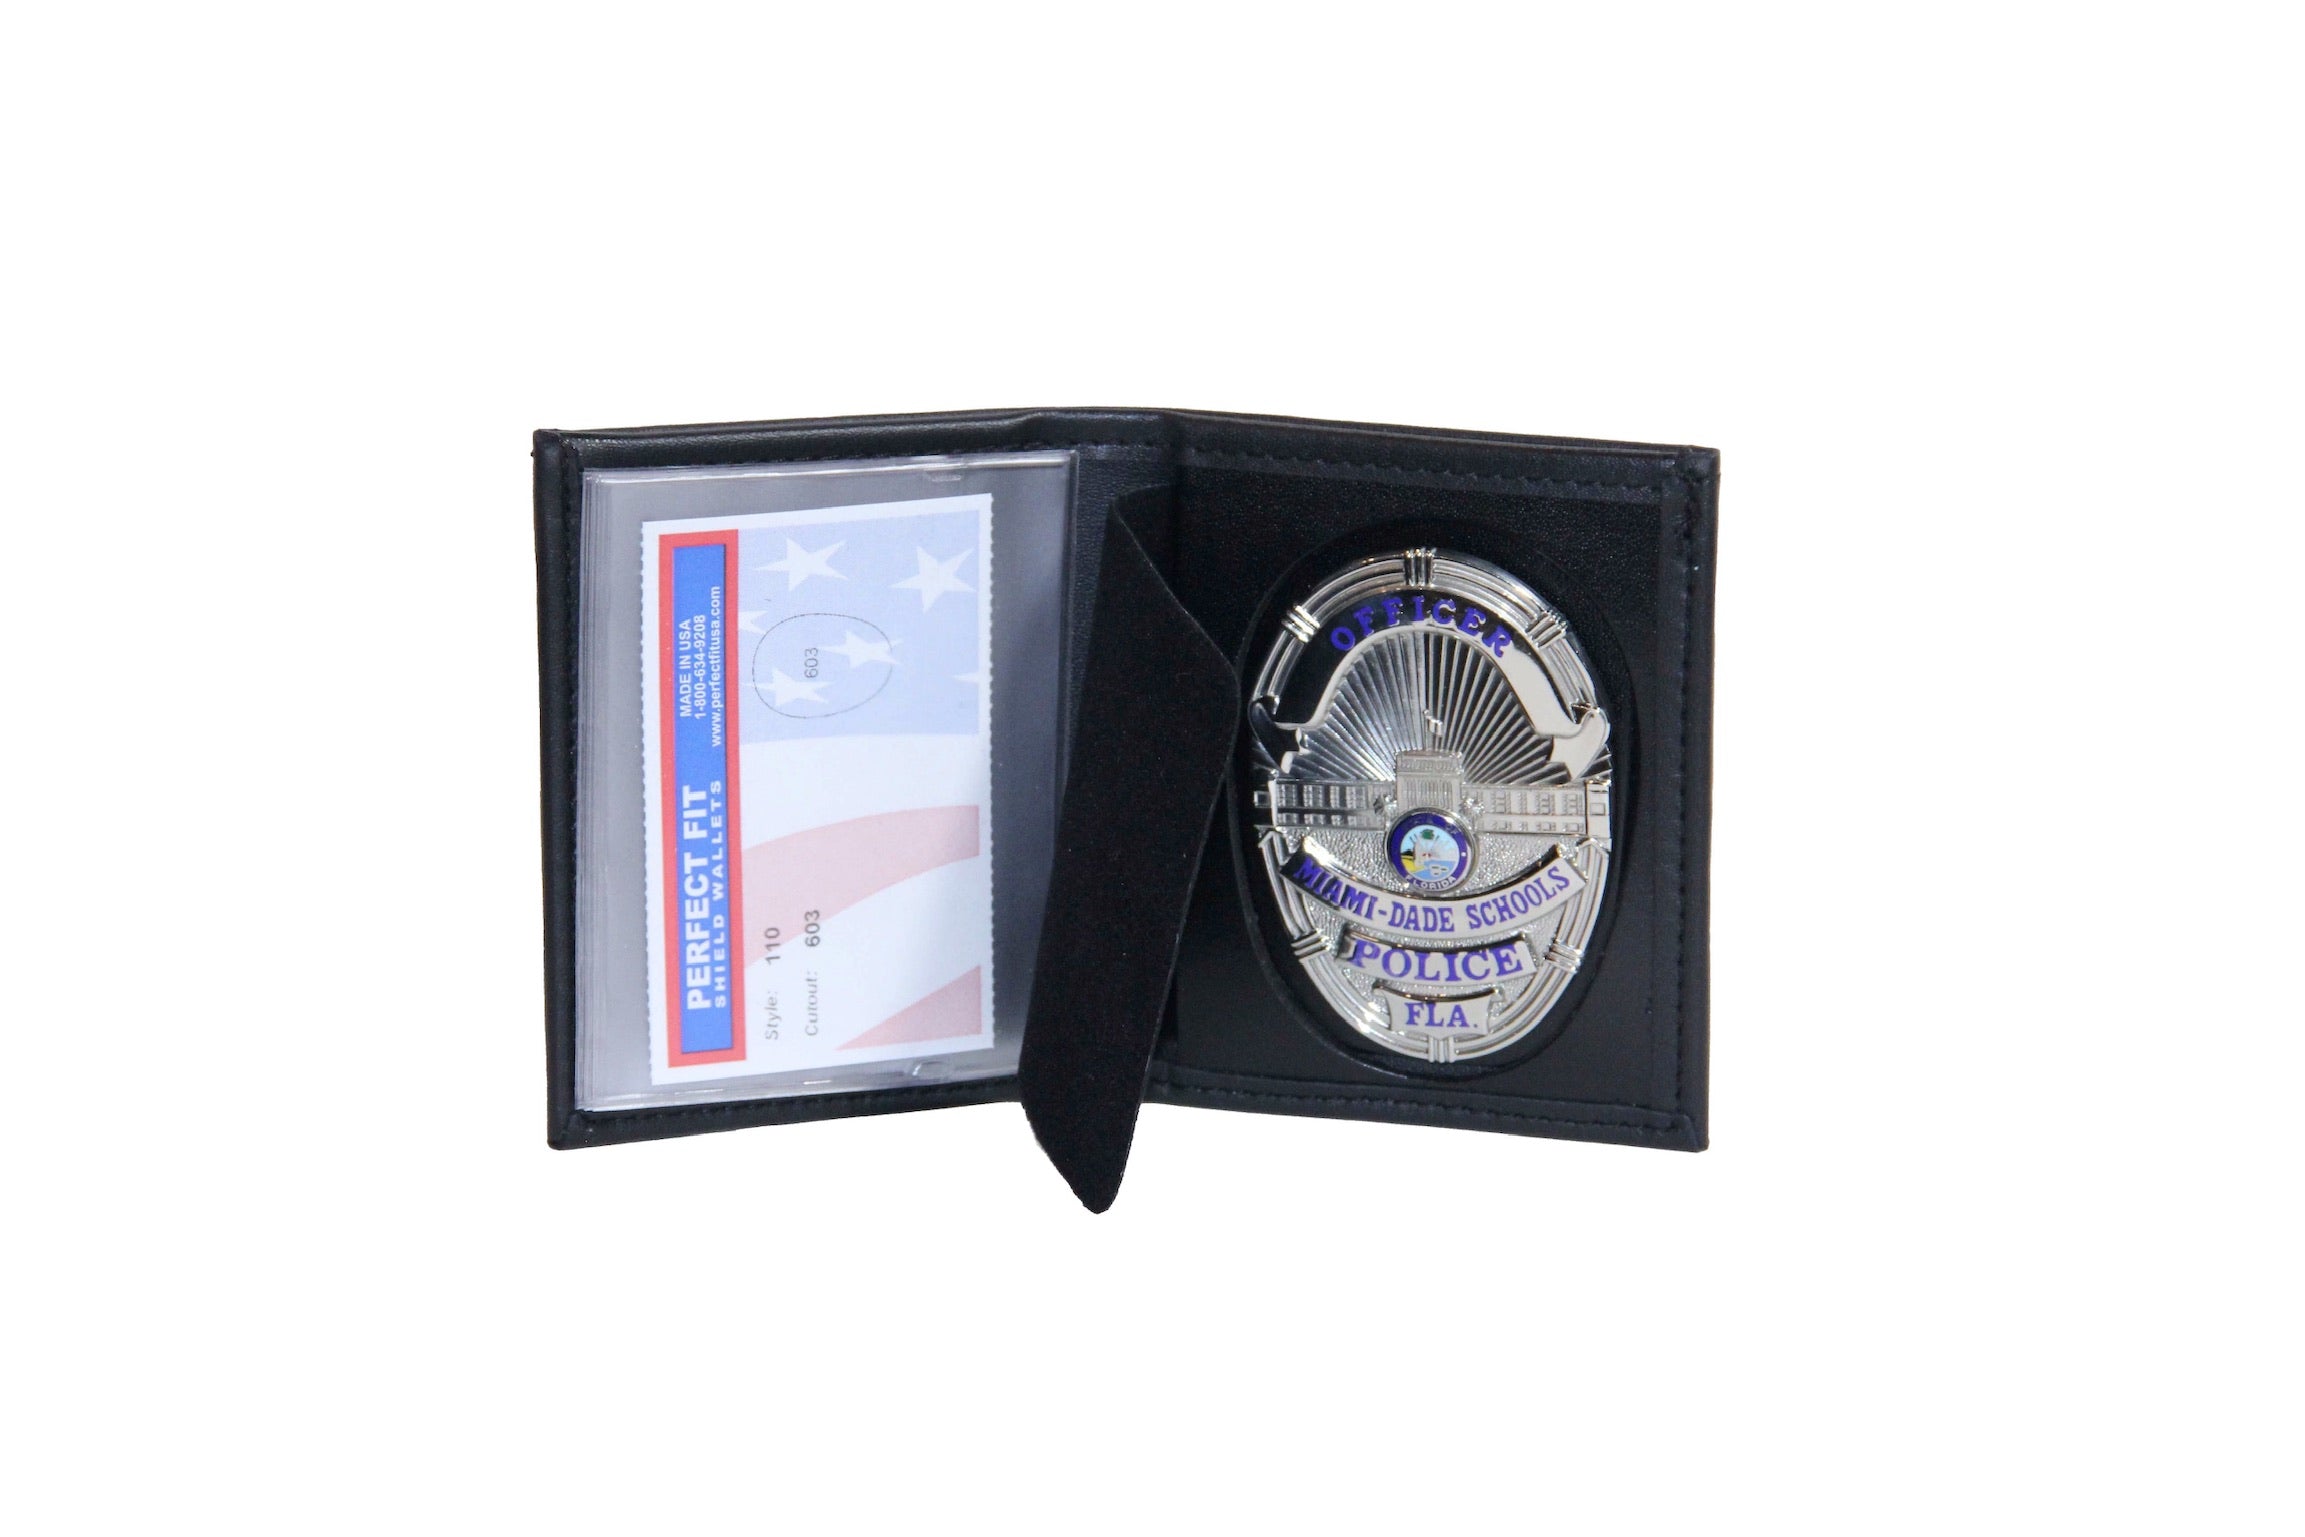 Miami Dade Schools Police Department Mini Badge ID holder and Wallet (110)